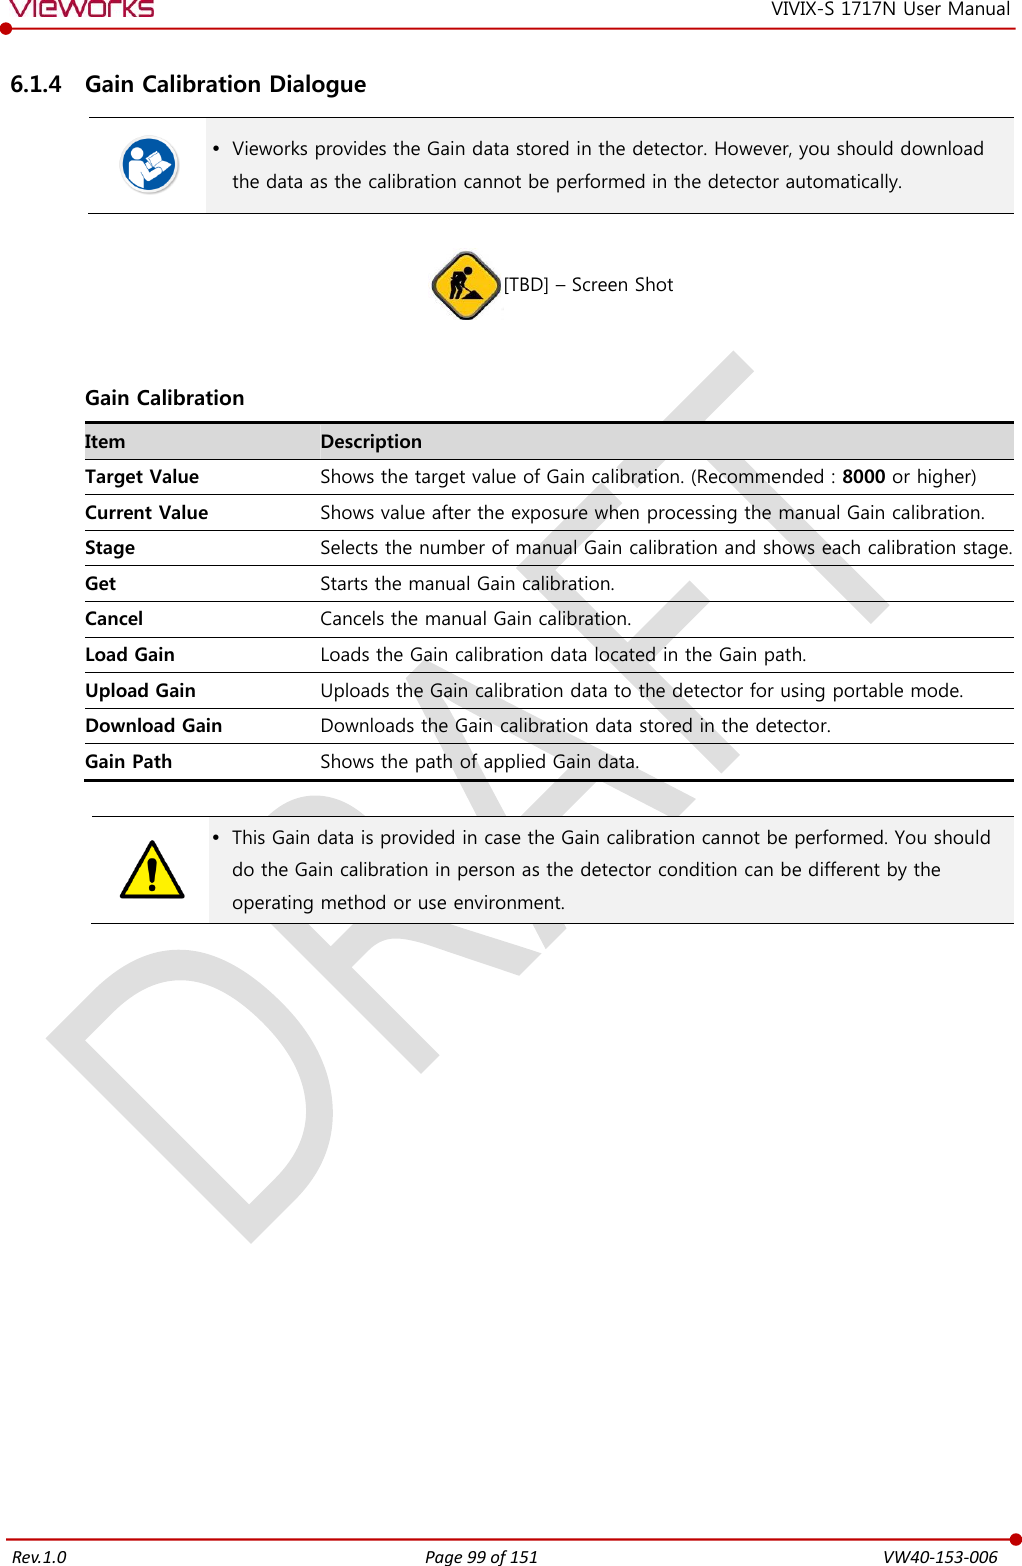   Rev.1.0 Page 99 of 151  VW40-153-006 VIVIX-S 1717N User Manual 6.1.4 Gain Calibration Dialogue   Vieworks provides the Gain data stored in the detector. However, you should download the data as the calibration cannot be performed in the detector automatically.  [TBD] – Screen Shot   Gain Calibration Item Description Target Value Shows the target value of Gain calibration. (Recommended : 8000 or higher) Current Value Shows value after the exposure when processing the manual Gain calibration. Stage Selects the number of manual Gain calibration and shows each calibration stage. Get Starts the manual Gain calibration. Cancel Cancels the manual Gain calibration. Load Gain Loads the Gain calibration data located in the Gain path. Upload Gain Uploads the Gain calibration data to the detector for using portable mode. Download Gain Downloads the Gain calibration data stored in the detector. Gain Path Shows the path of applied Gain data.    This Gain data is provided in case the Gain calibration cannot be performed. You should do the Gain calibration in person as the detector condition can be different by the operating method or use environment.  